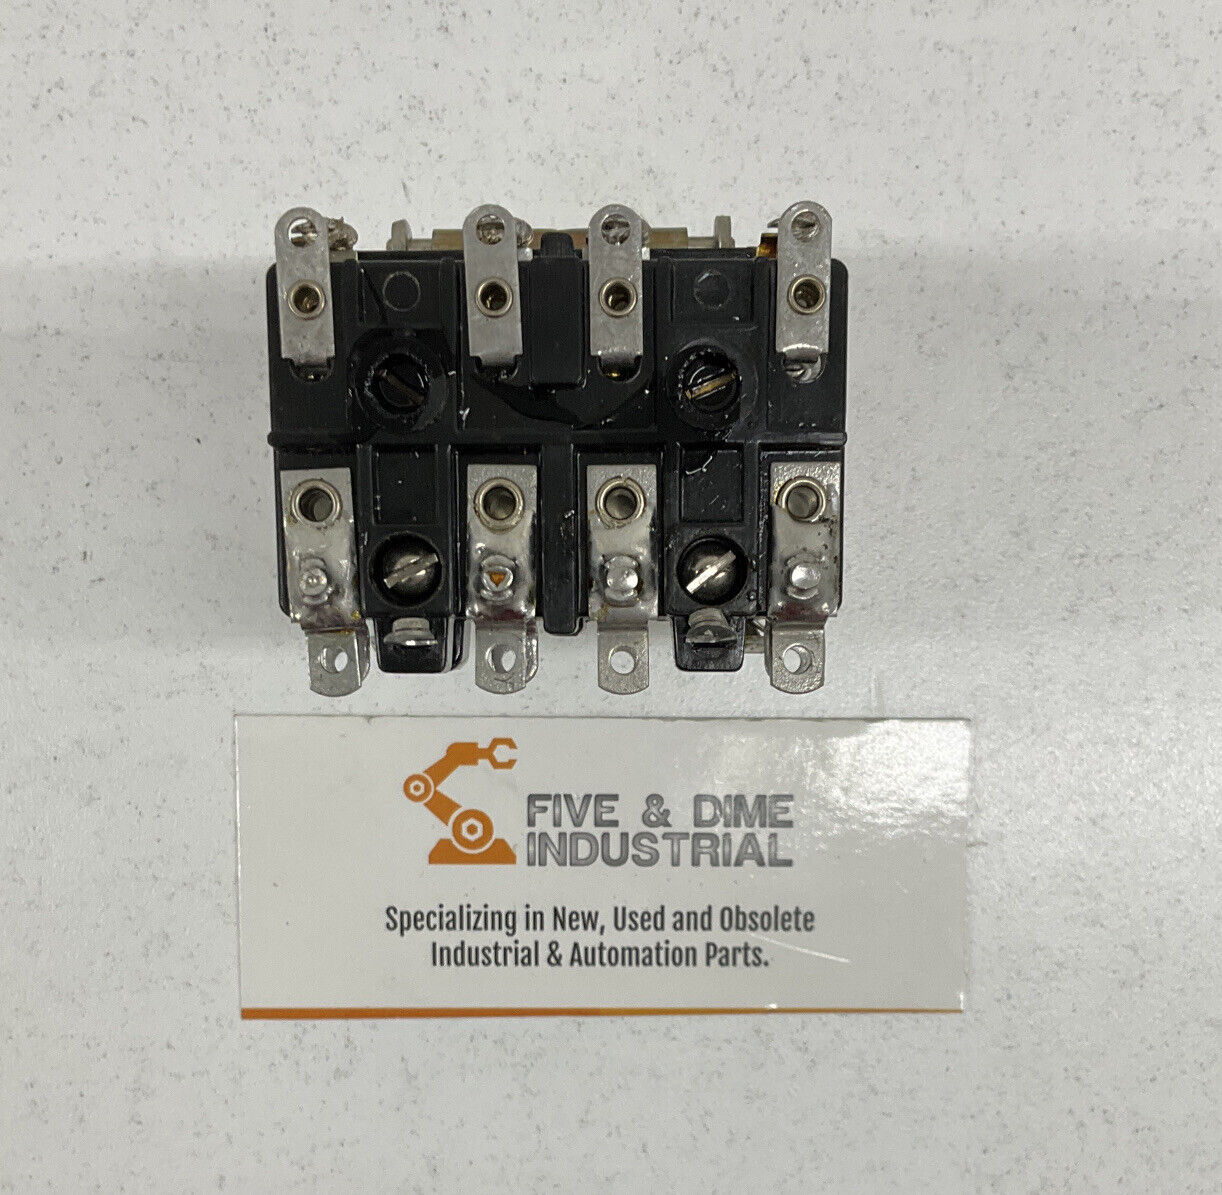 Ohmite Dox 188T 4PDT 10A 220 Volts DC Gen Purpose Relay  (YE110)